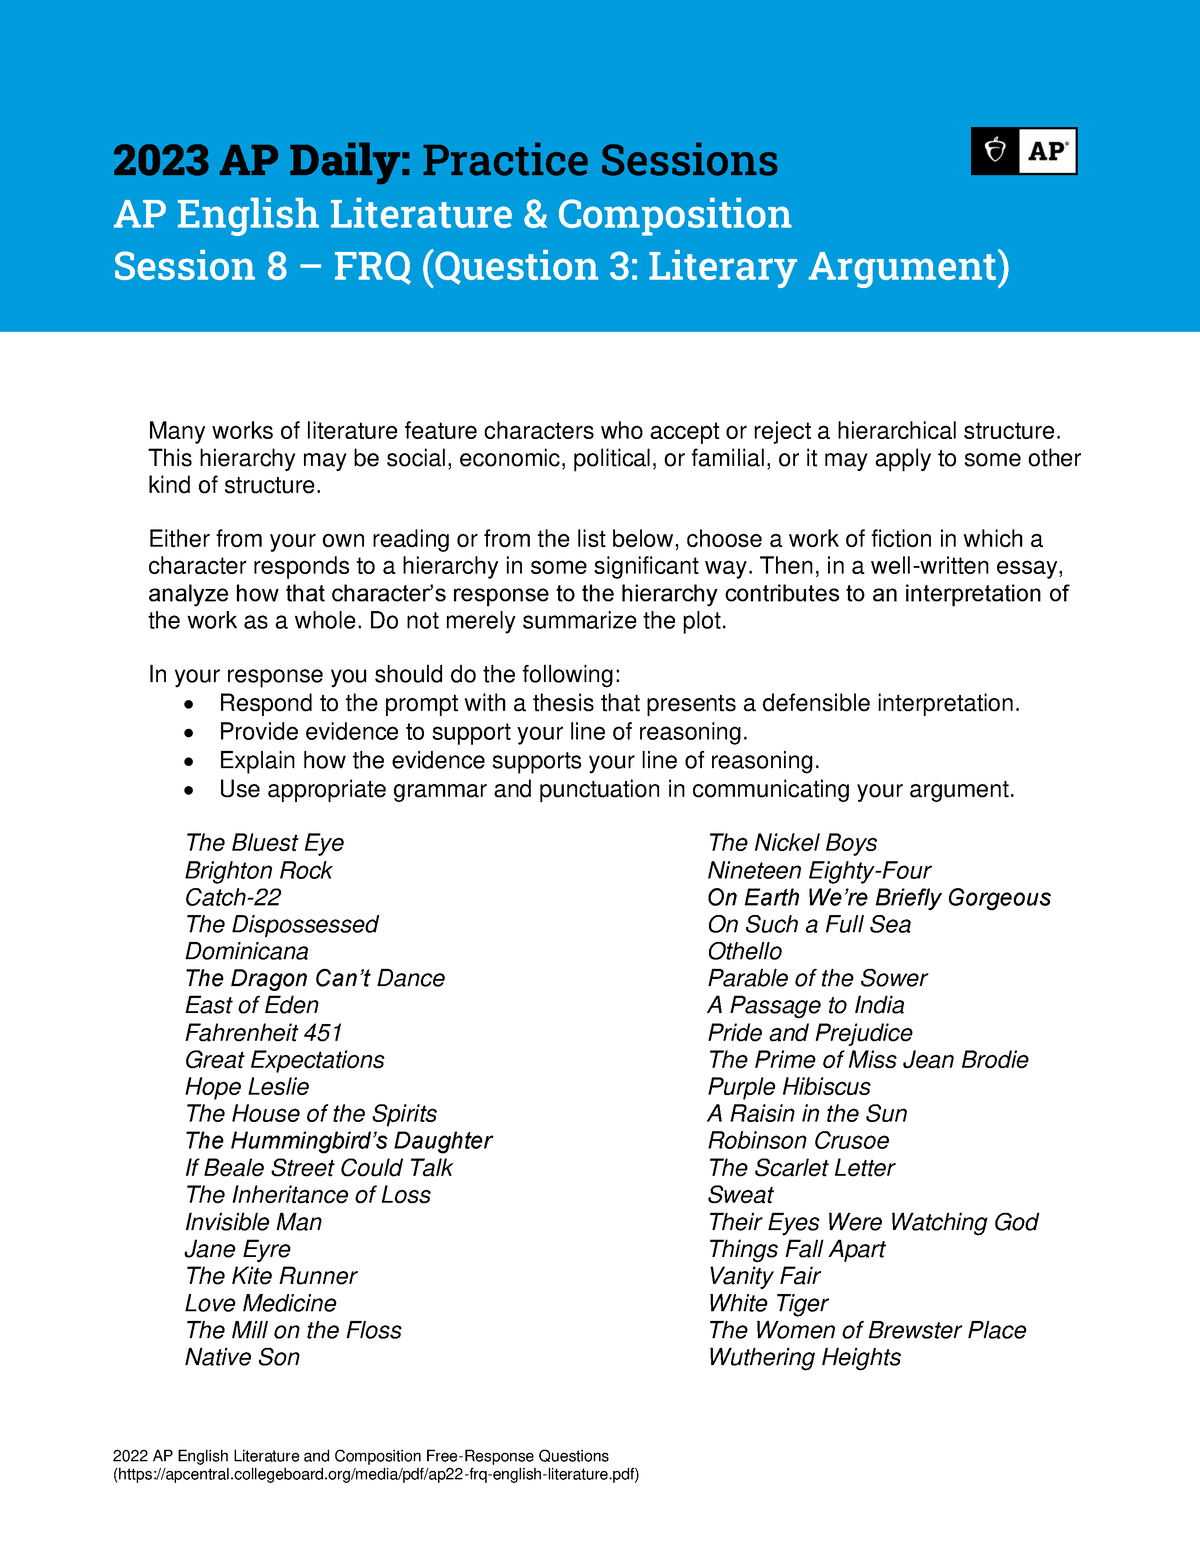 Session 8 English Literature Composition 2023 AP Daily Practice